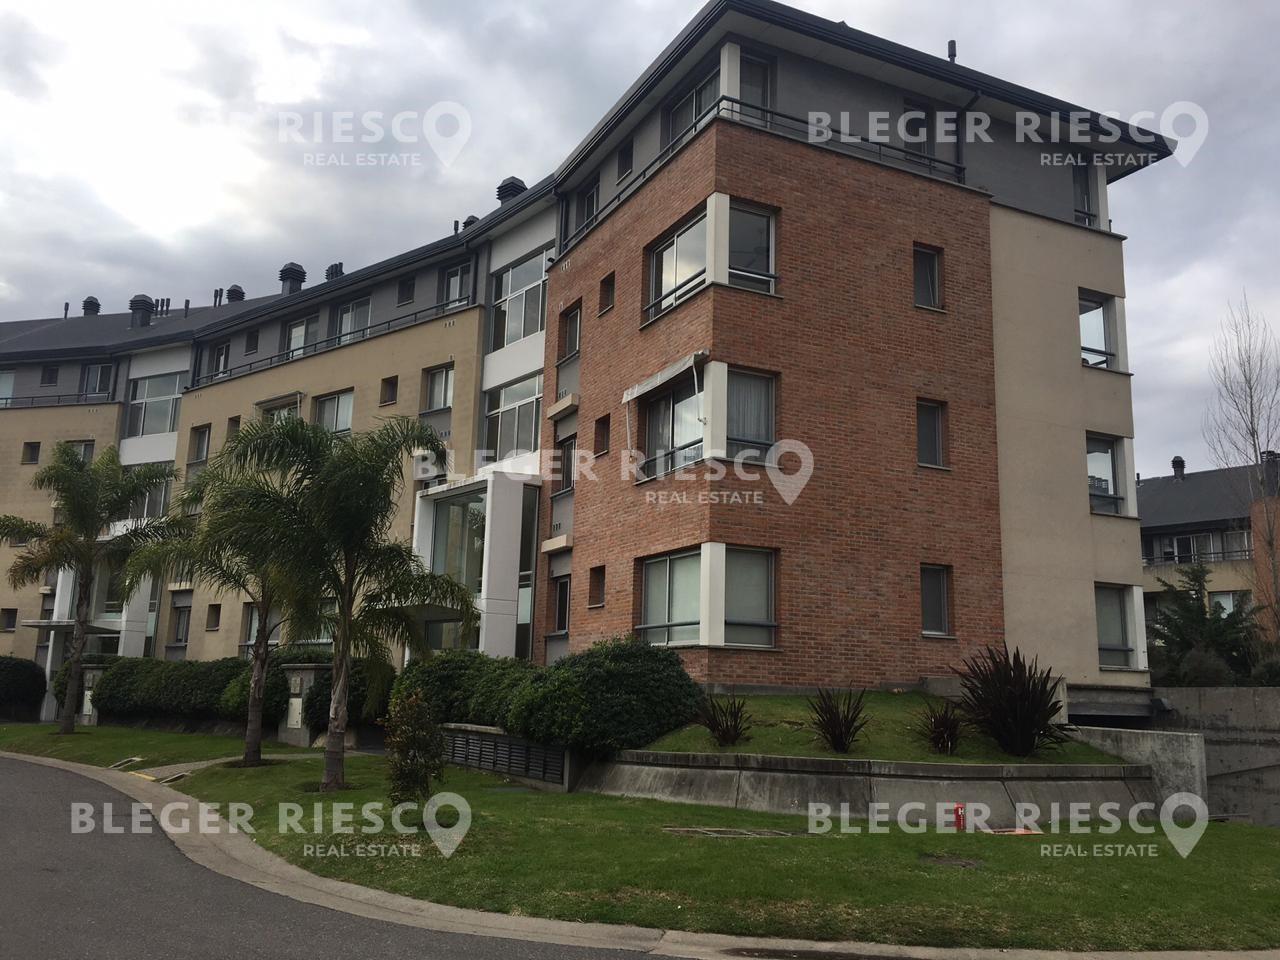 #4861675 | Rental | Apartment | Portezuelo (Bleger-Riesco Real State)